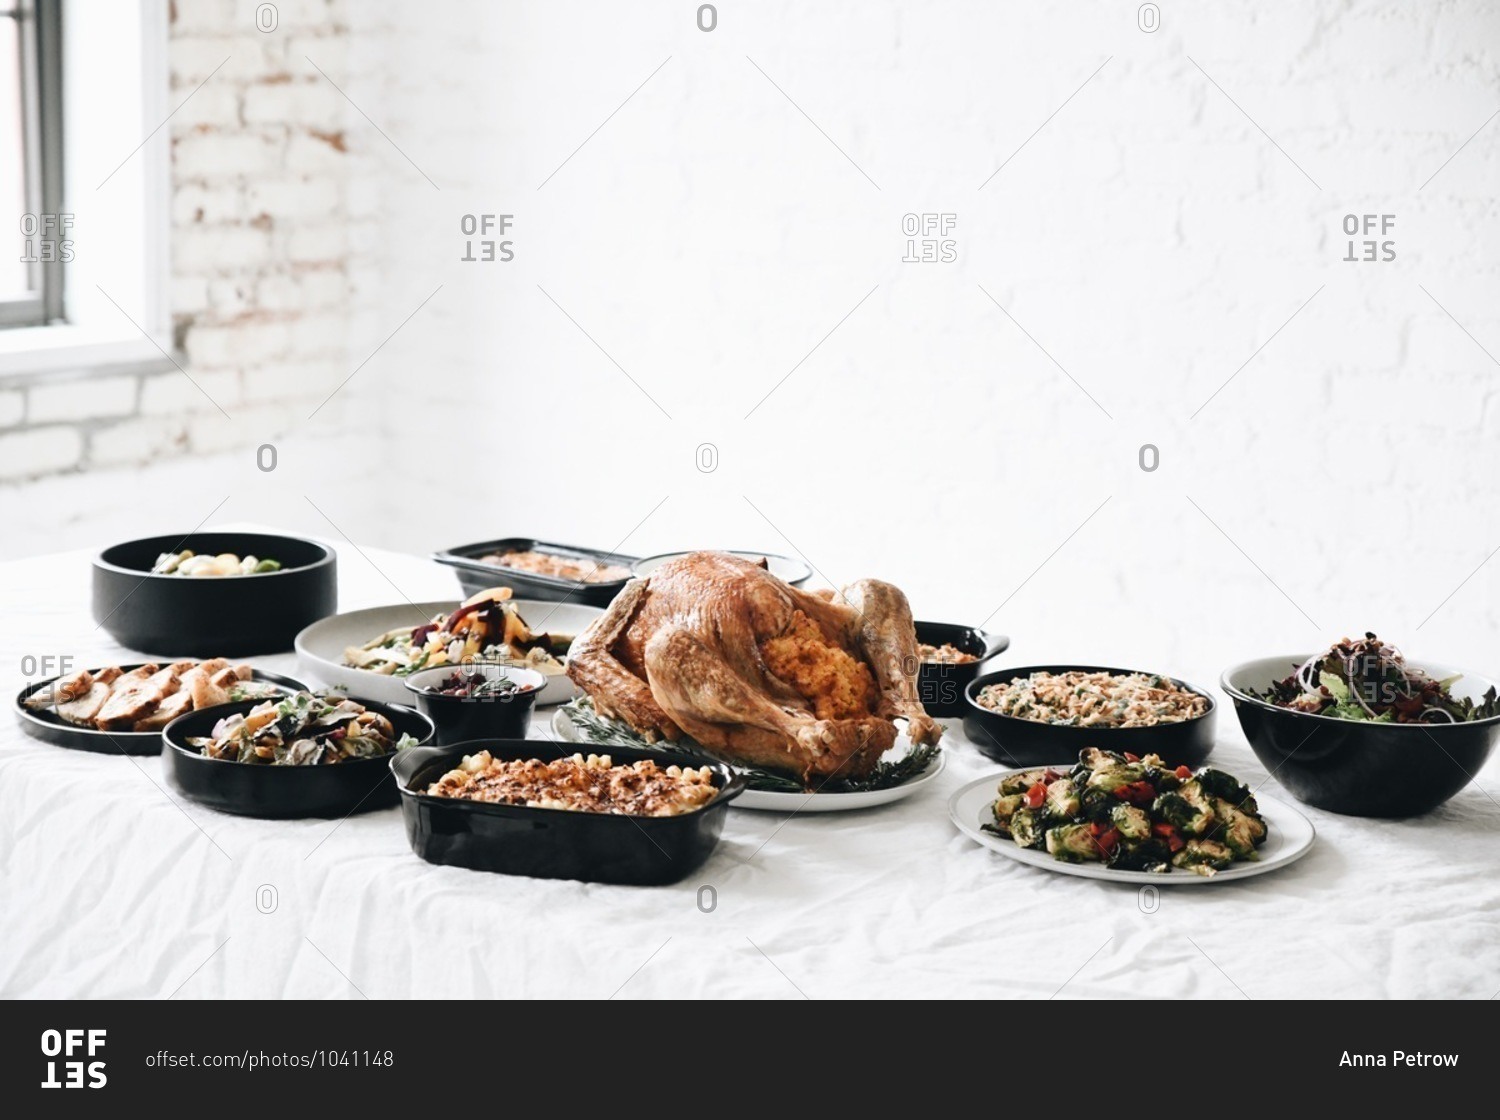 Traditional Thanksgiving dinner food served for a gathering\
on a table in front of white wall stock photo - OFFSET